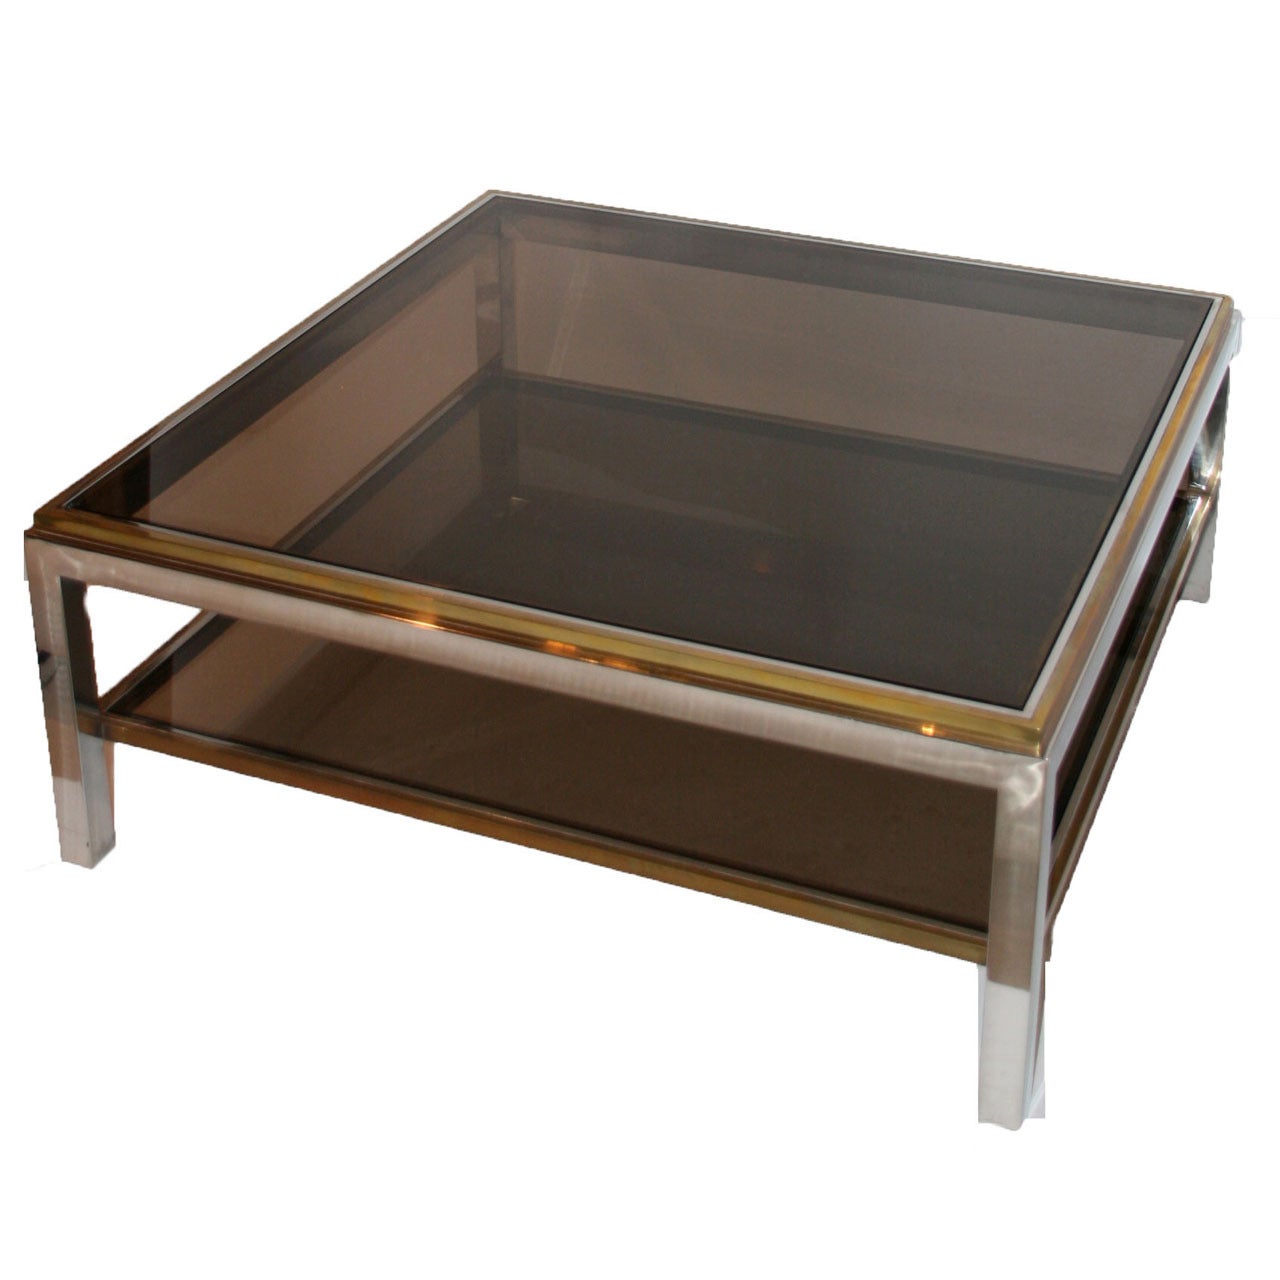 Gilt brass and chrome steel coffee table in the style of Willy Rizzo, circa 1970.